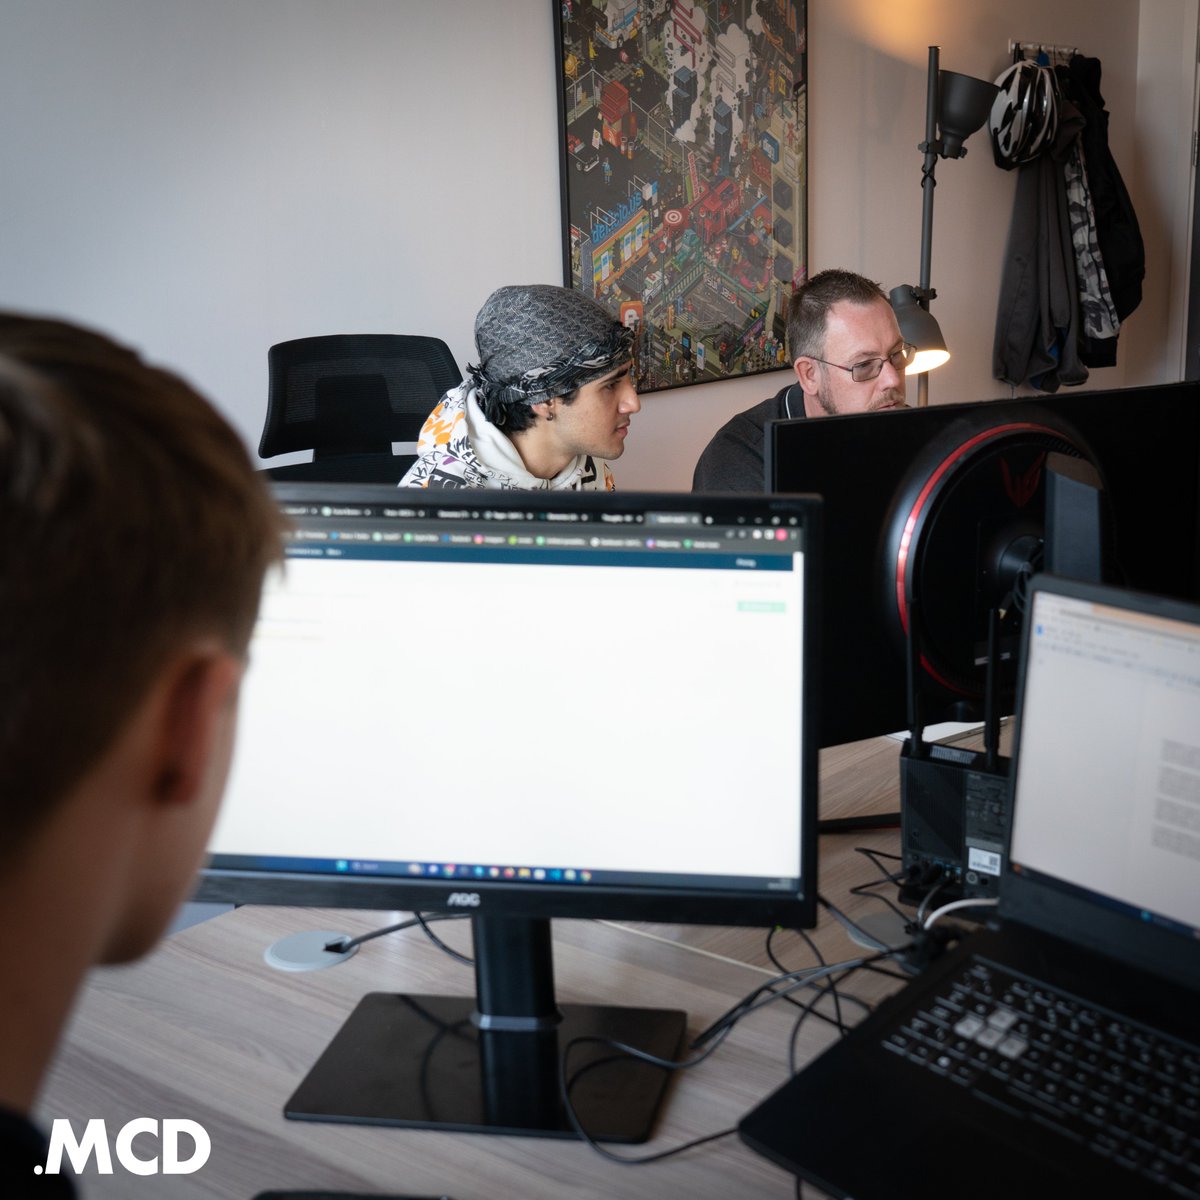 Are you looking for innovative software solutions to enhance your business? Look no further than MCD Systems. Our team of experts are dedicated to designing cutting-edge software that delivers real value and results. #innovativesoftware #businesssolutions